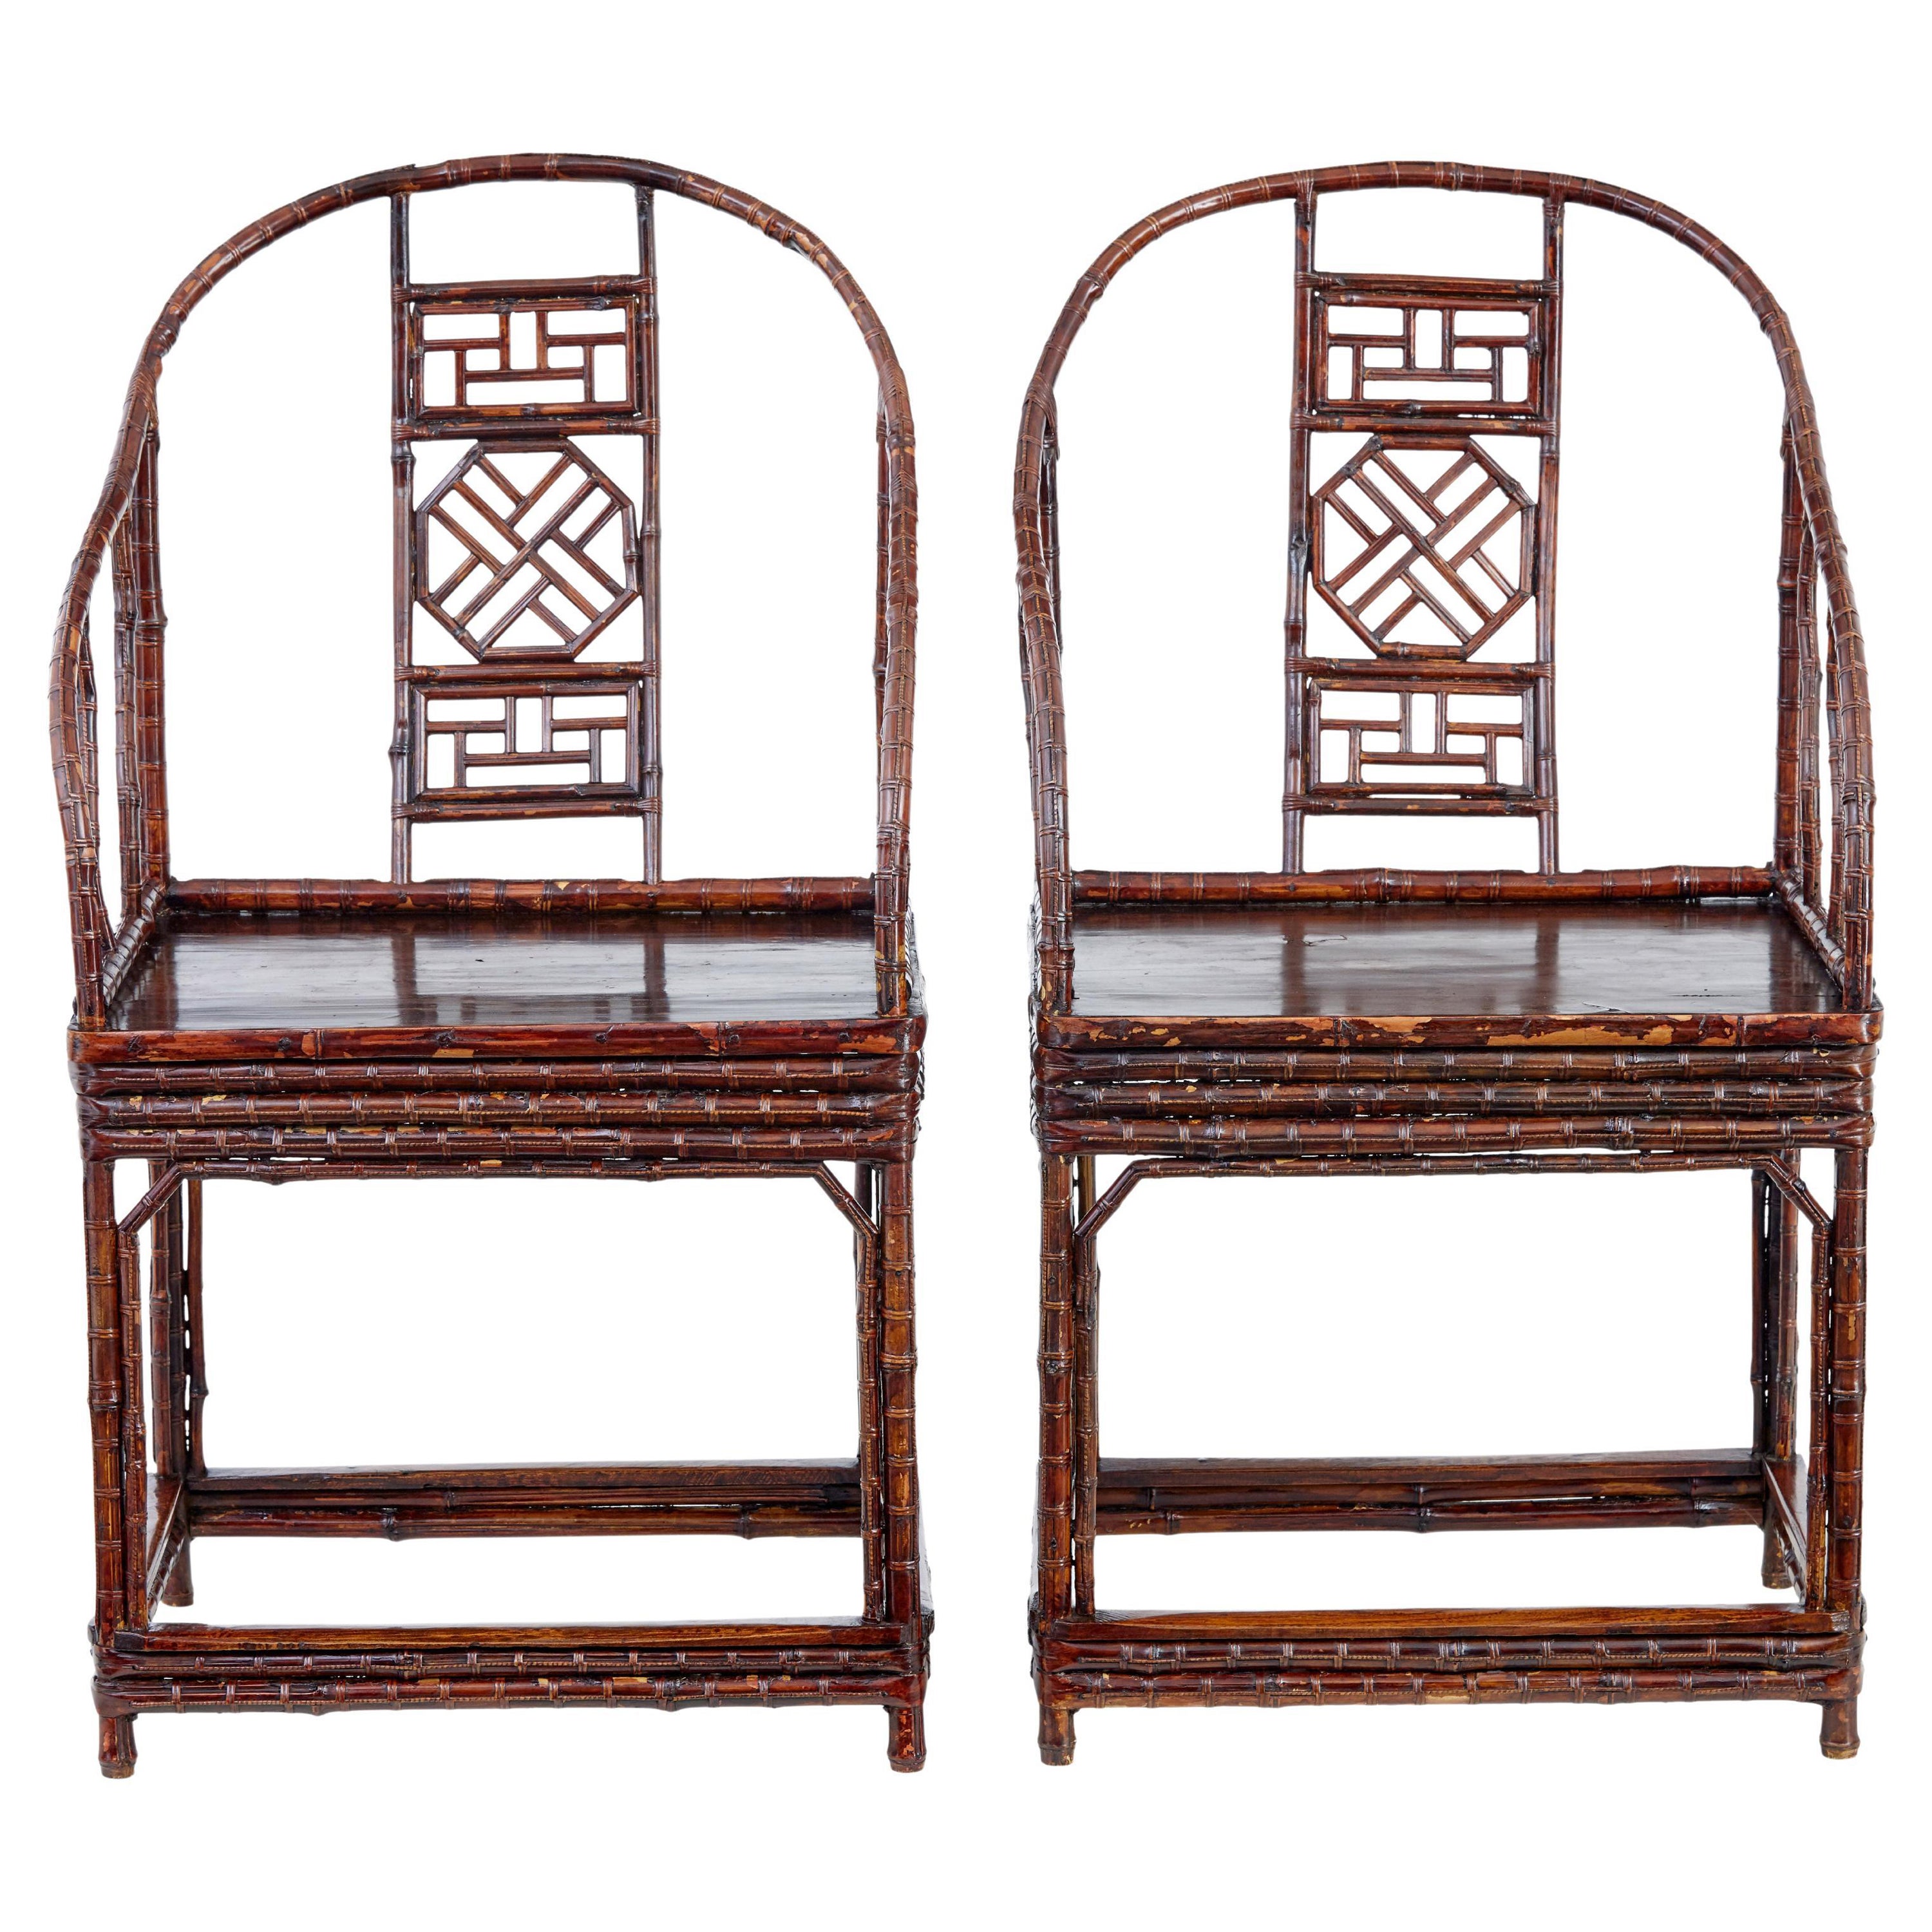 Pair of 19th century bamboo canework Chinese chairs